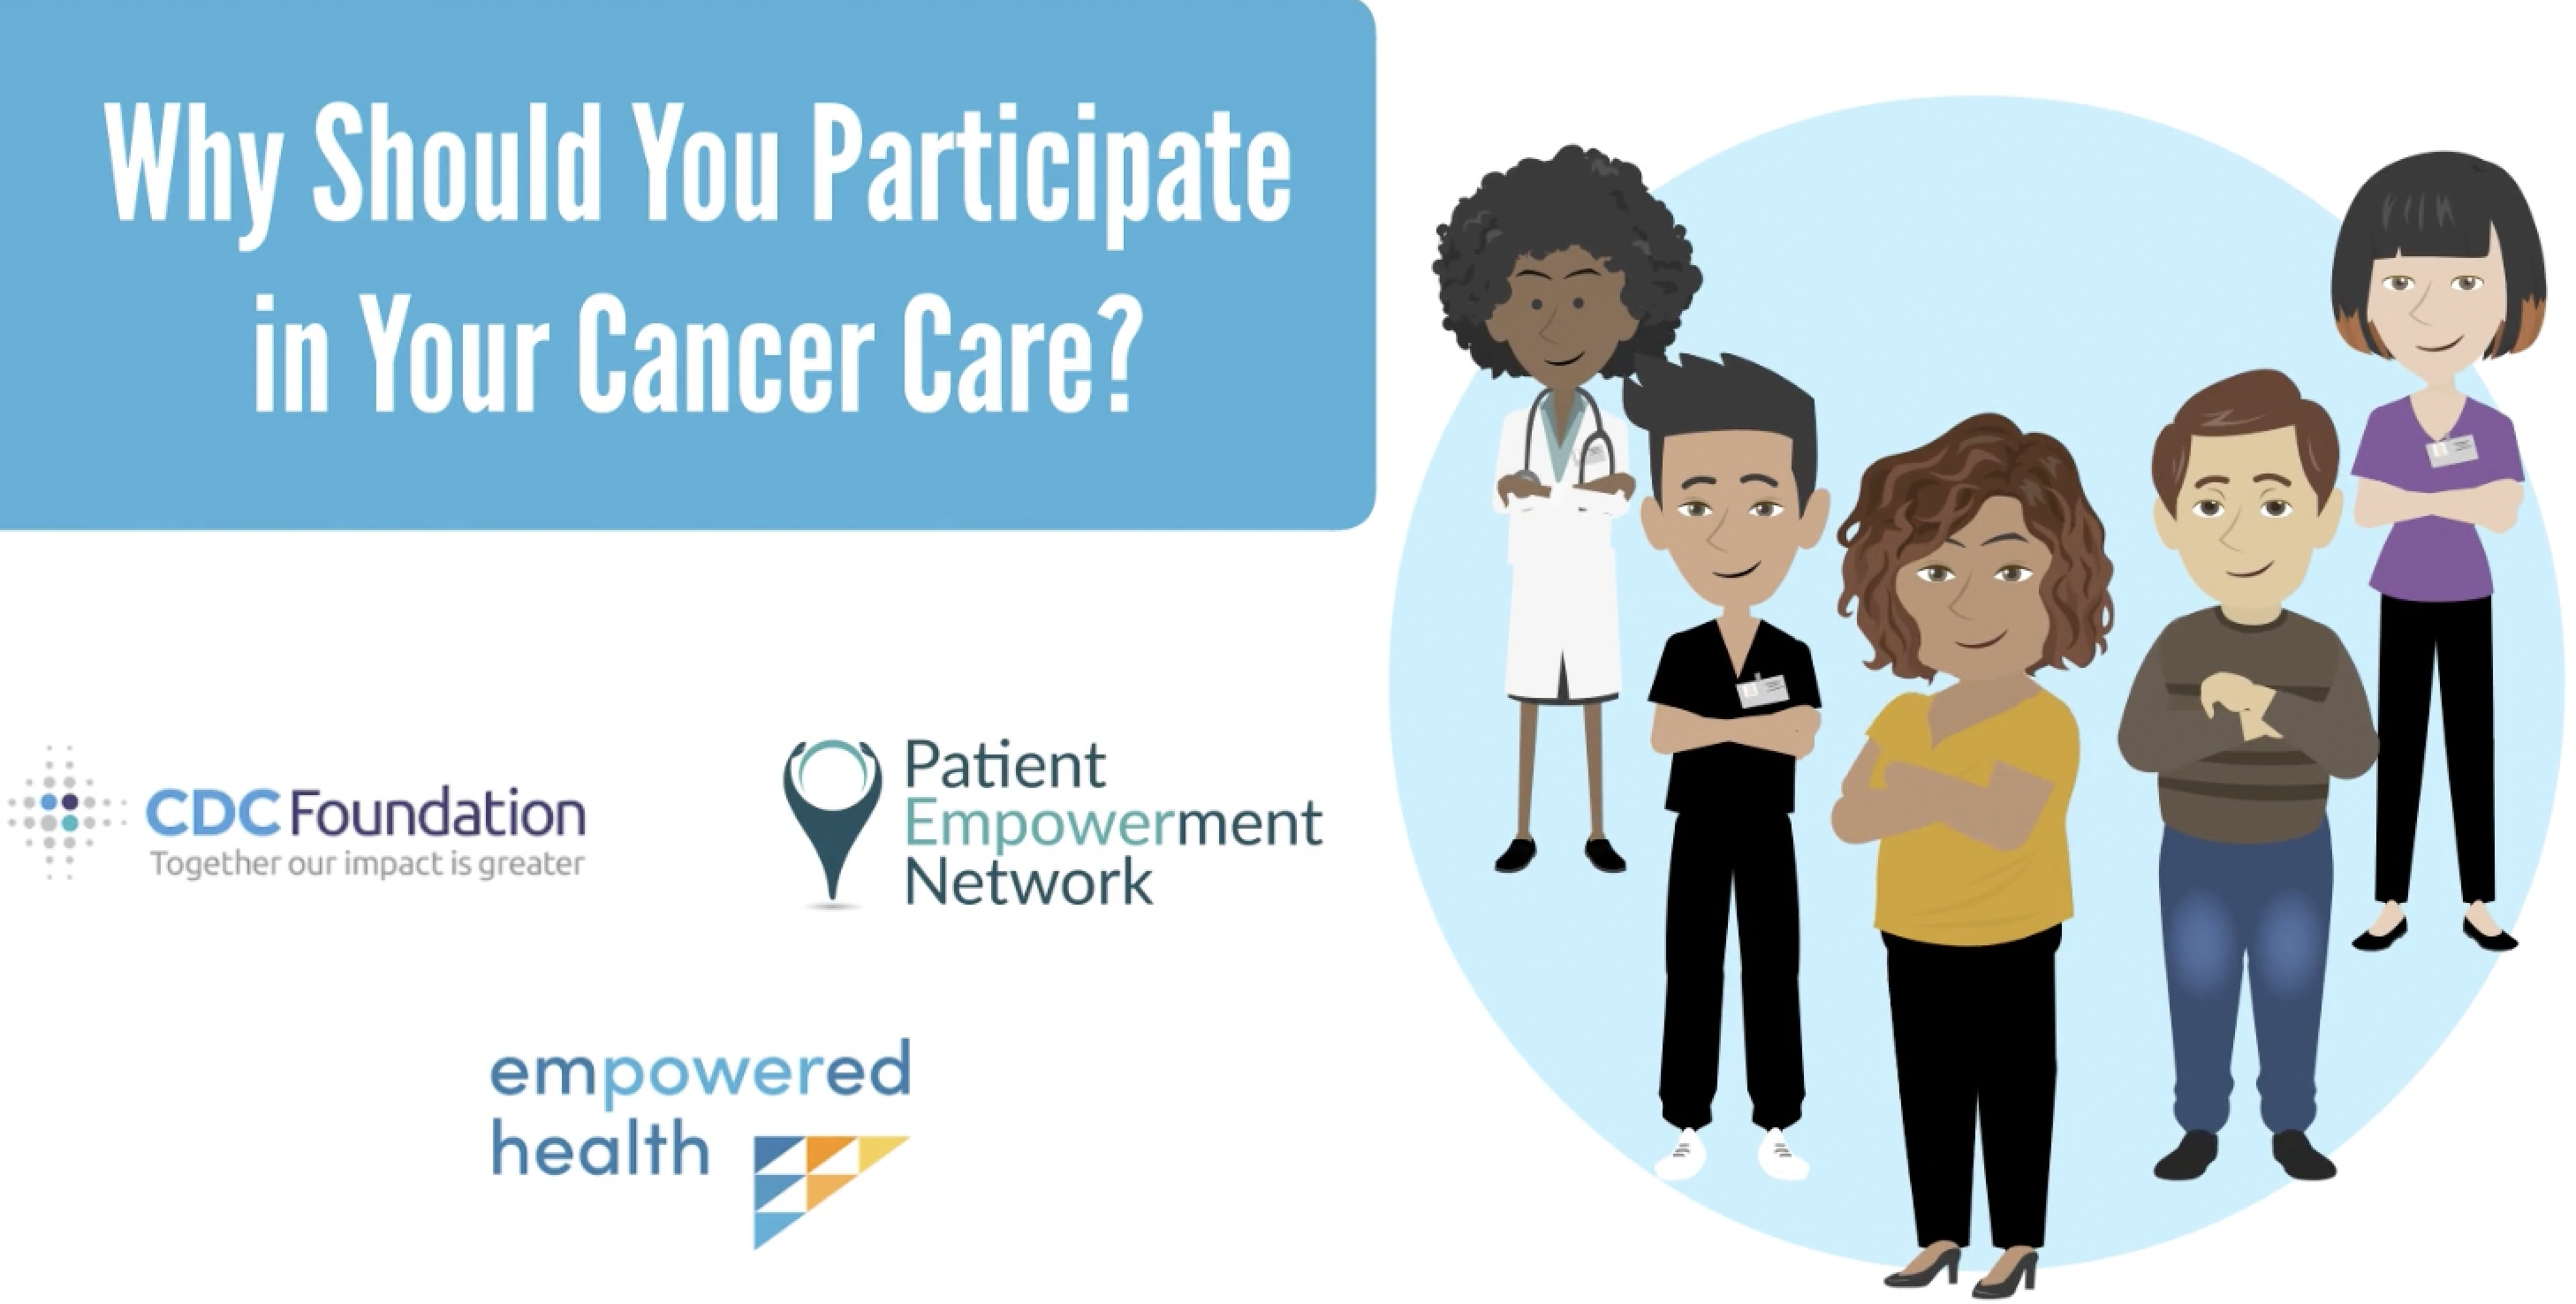 Why Should You Participate in Your Cancer Care?